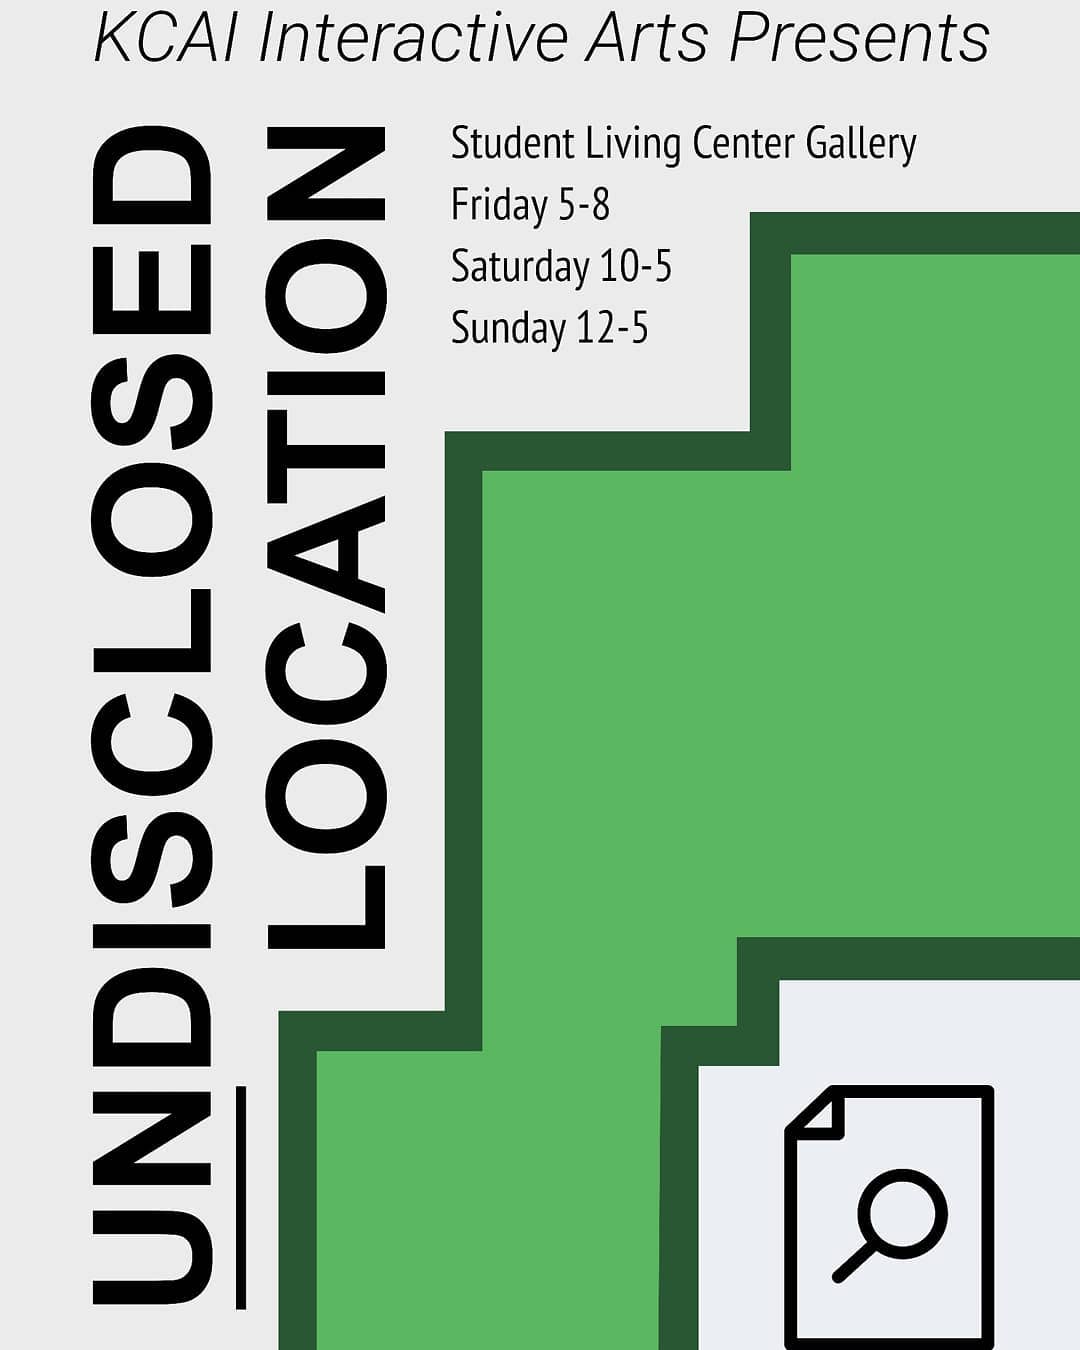 KCAI Interactive Arts presents: Undisclosed Location. 
Our End of Semester Show is next week –  with 6 classes, including work from our first graduating class, this is one you don’t want to miss! 
I’m so proud of these students and can’t wait for you all to see what they’ve been doing. Look out, world!!